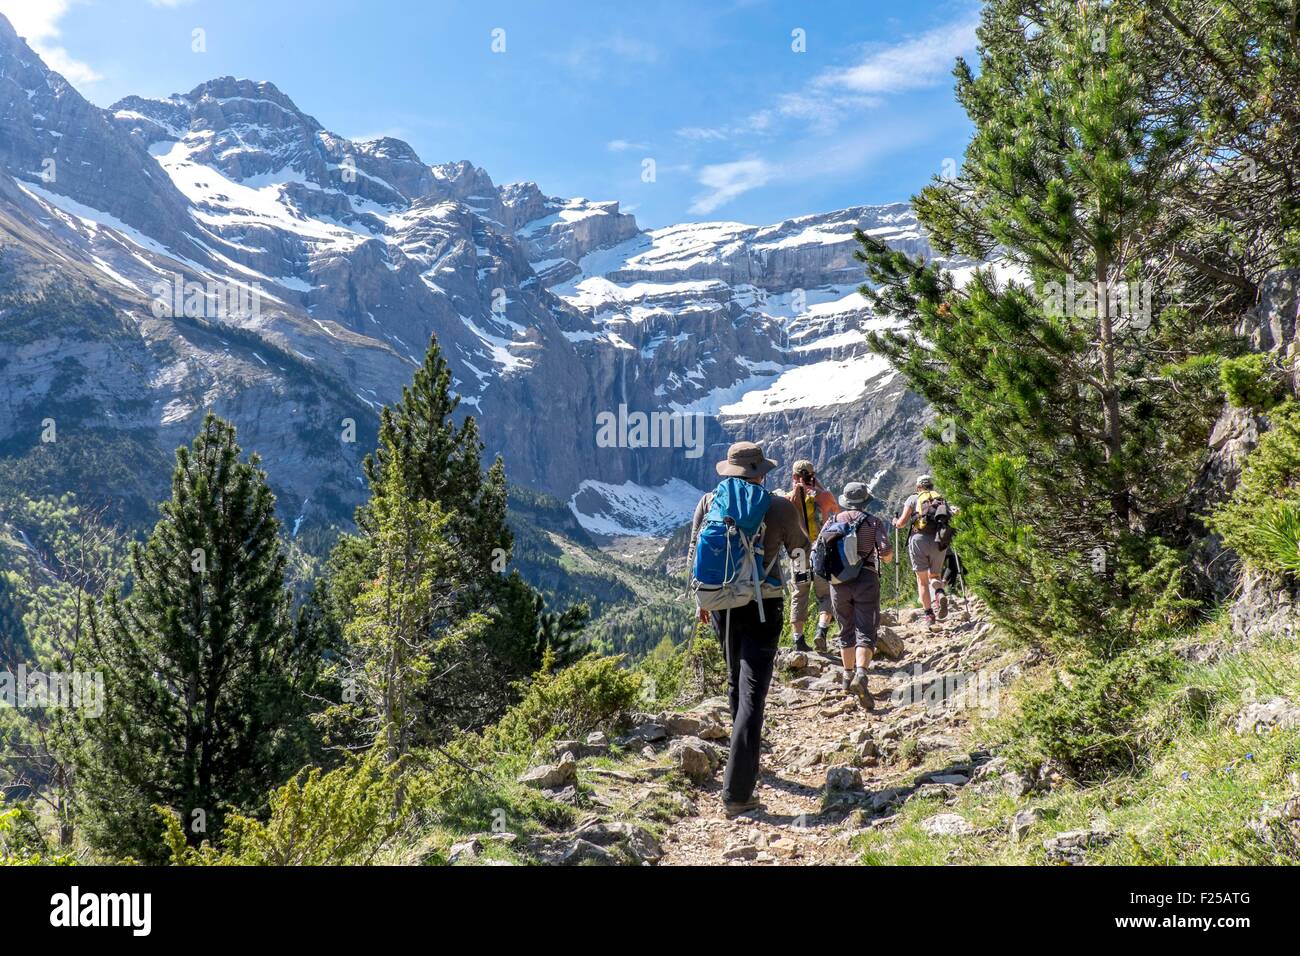 France, Hautes Pyrenees, Parc National des Pyrenees (Pyrenees National Park), Cirque de Gavarnie, listed as World Heritage by UNESCO Stock Photo